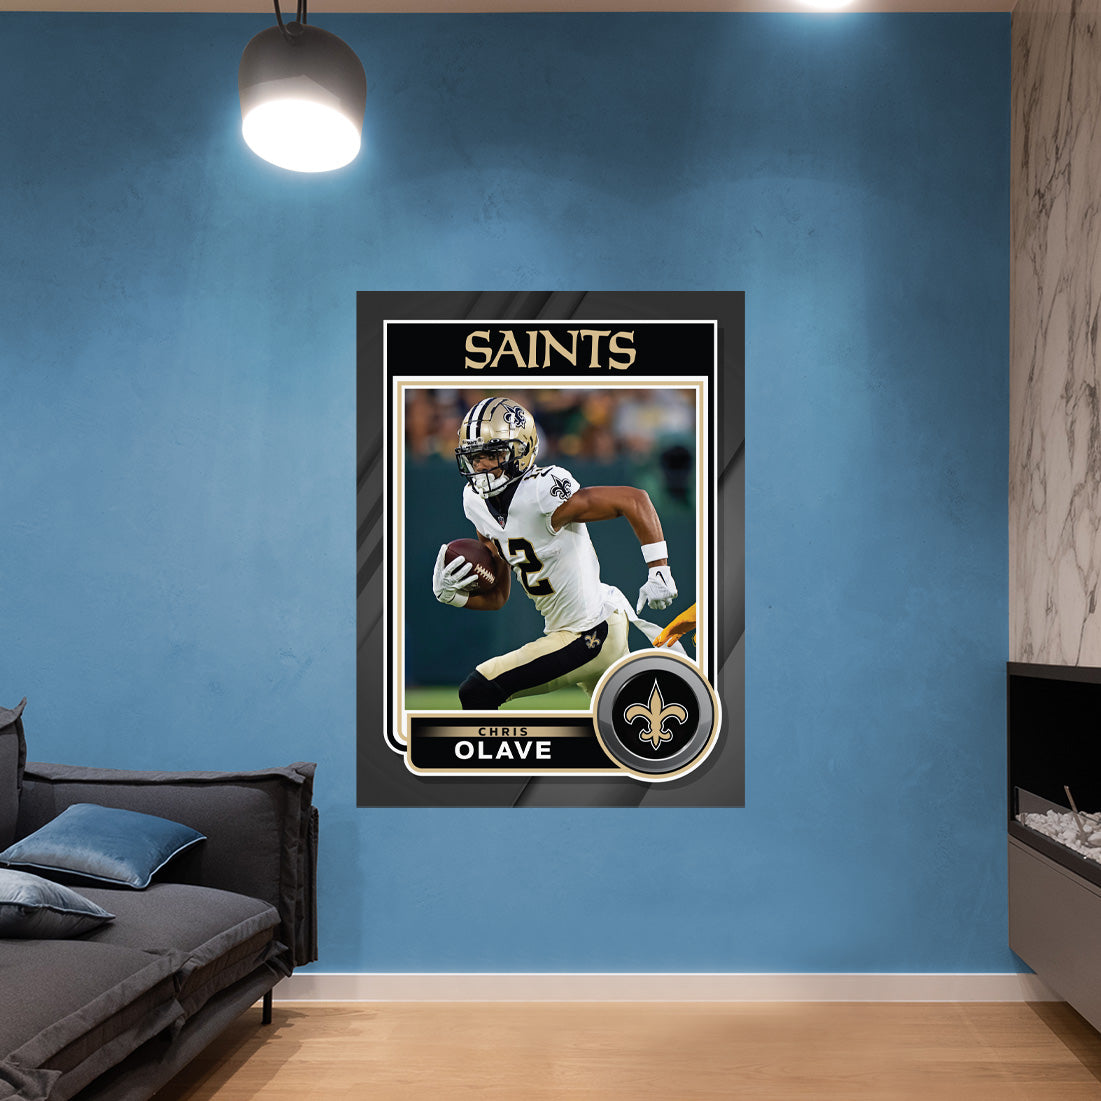 New Orleans Saints: Chris Olave 2022 - Officially Licensed NFL